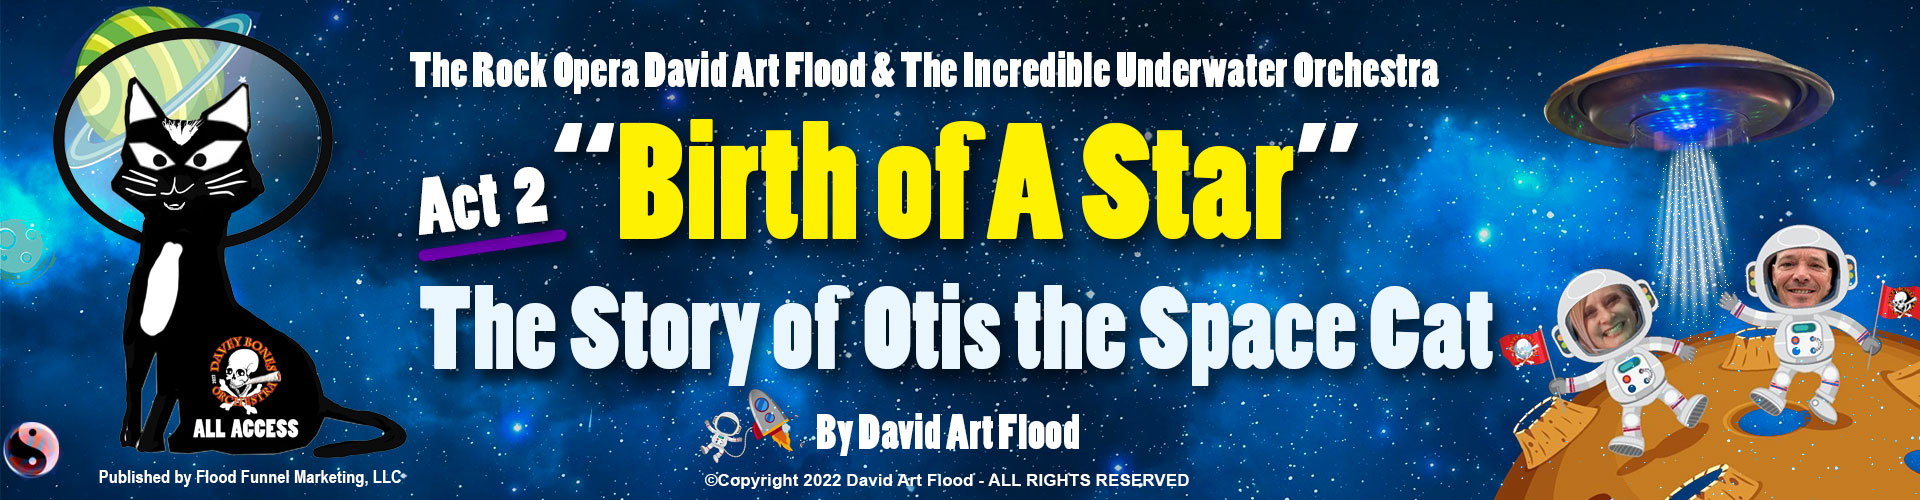 Birth of A Star - The Story of Otis the Space Cat